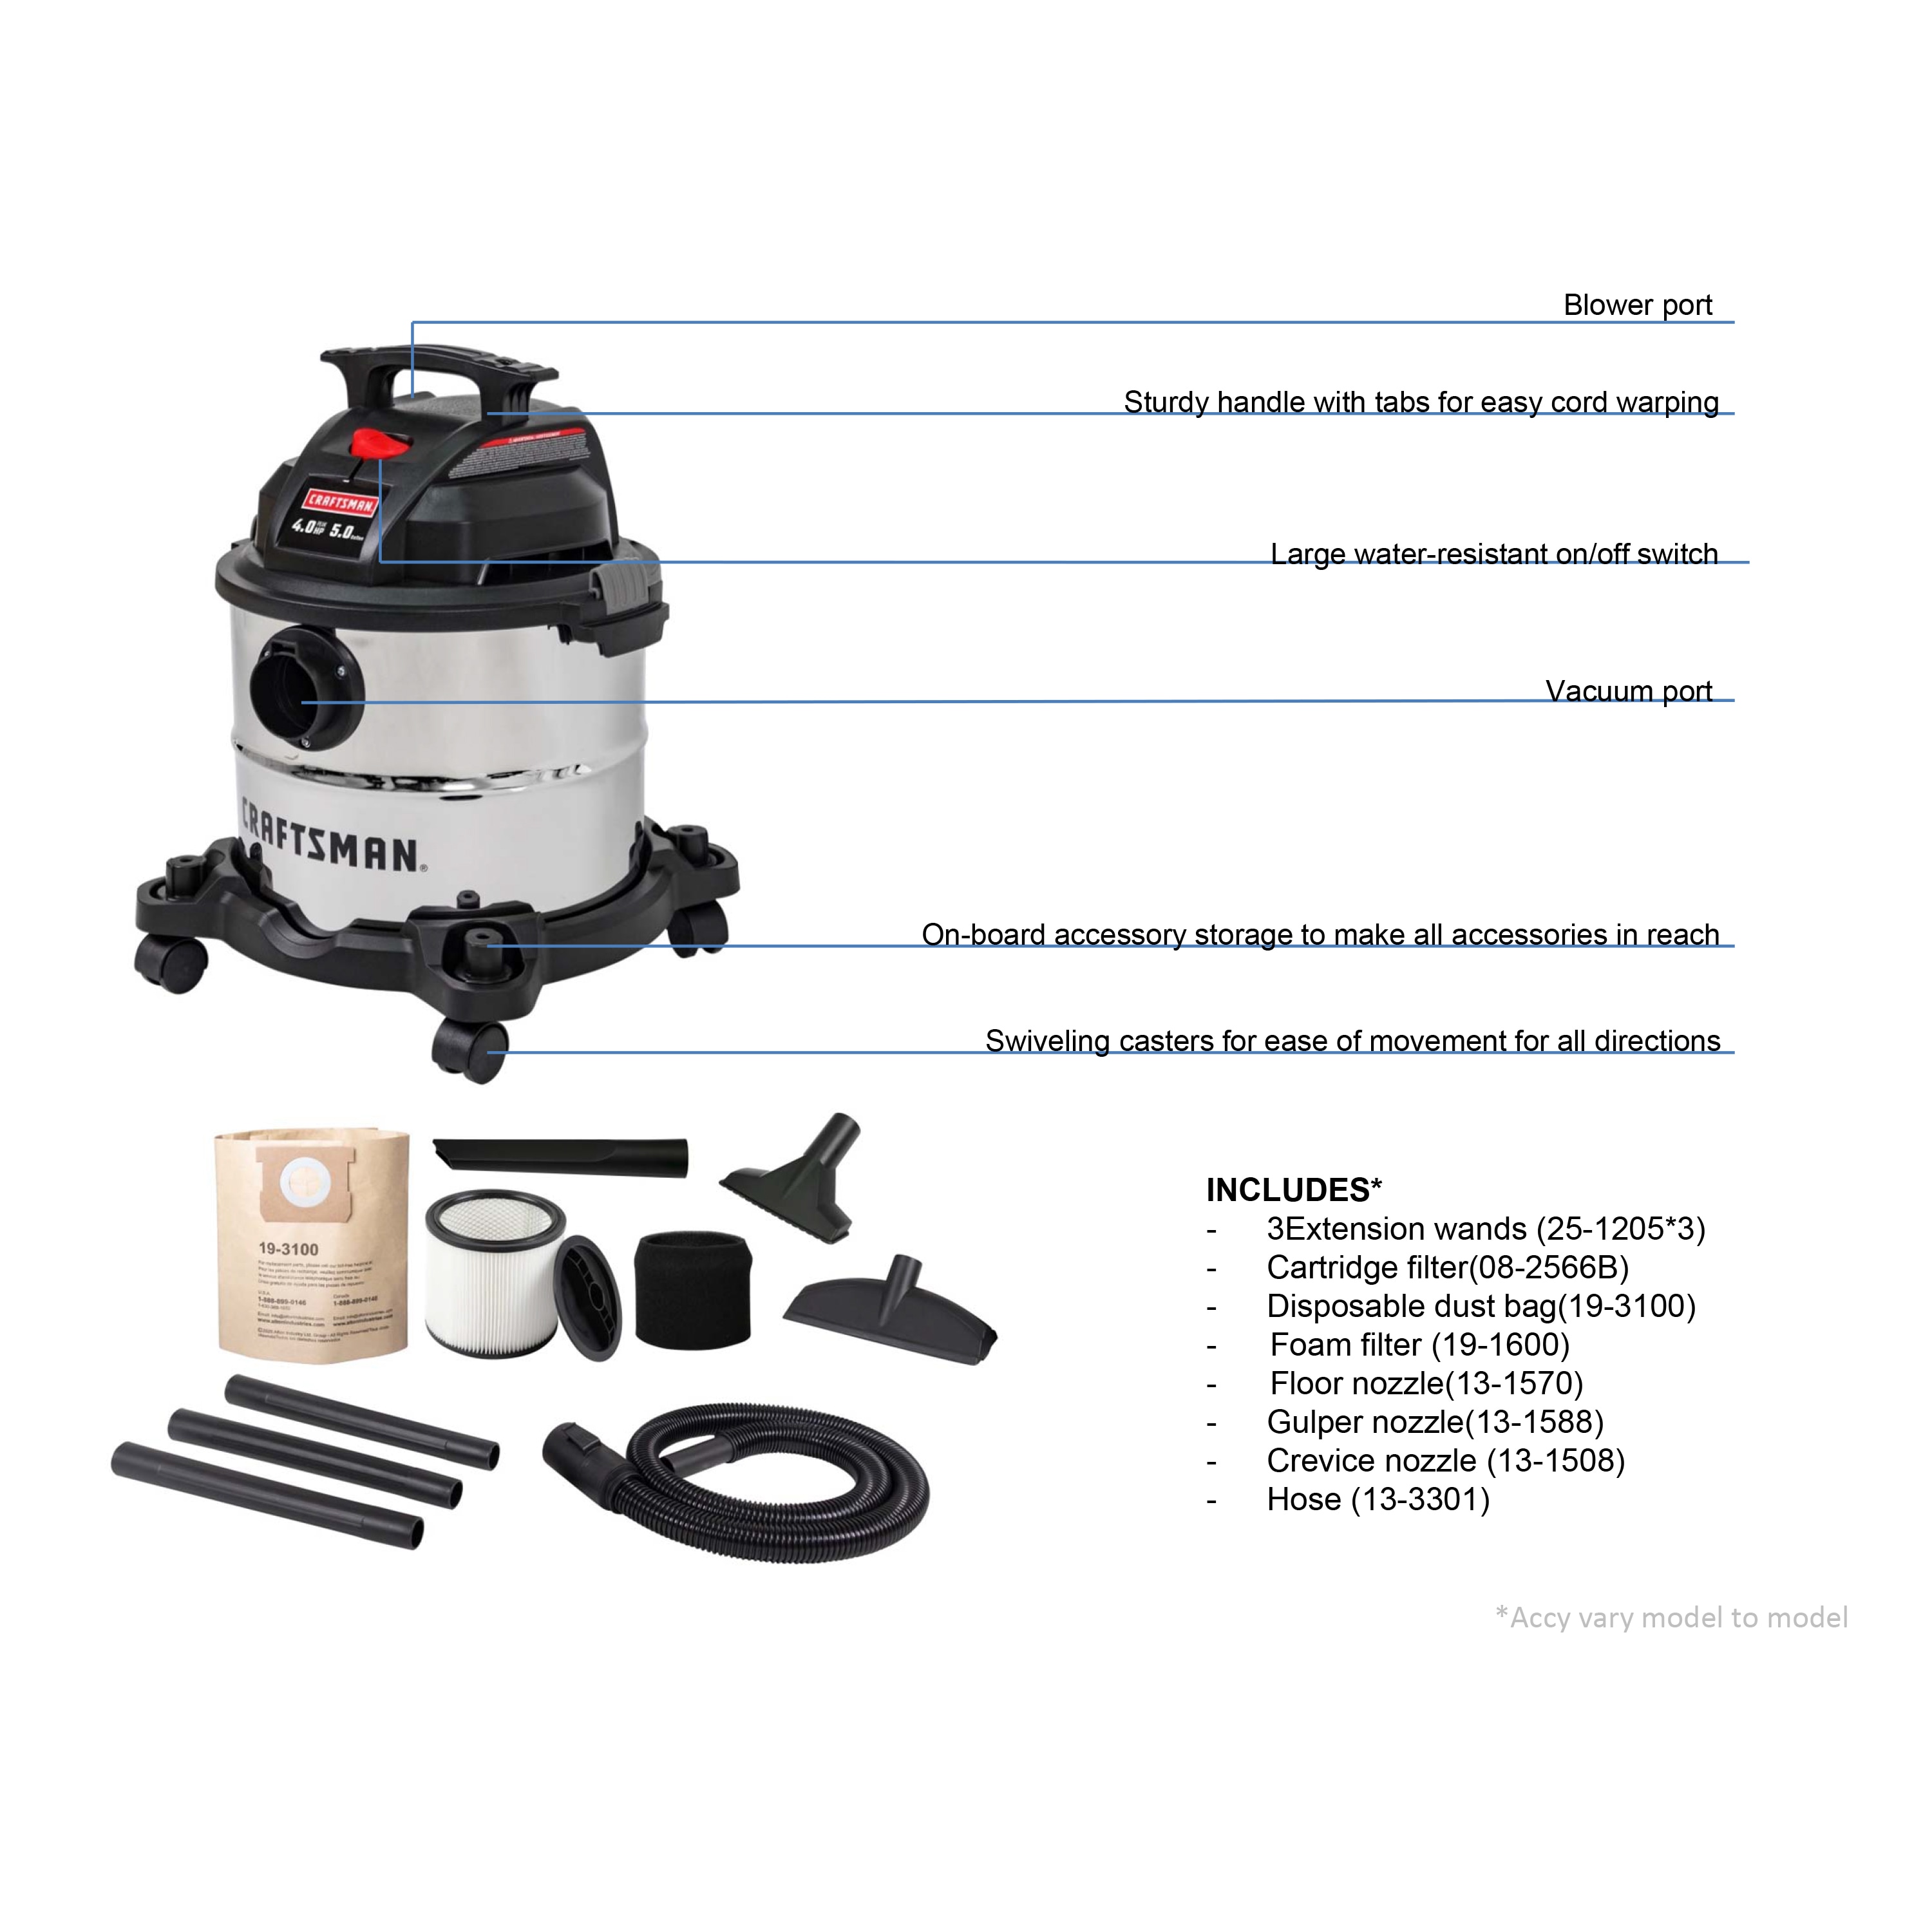 CRAFTSMAN 5-Gallons 4-HP Corded Wet/Dry Shop Vacuum with